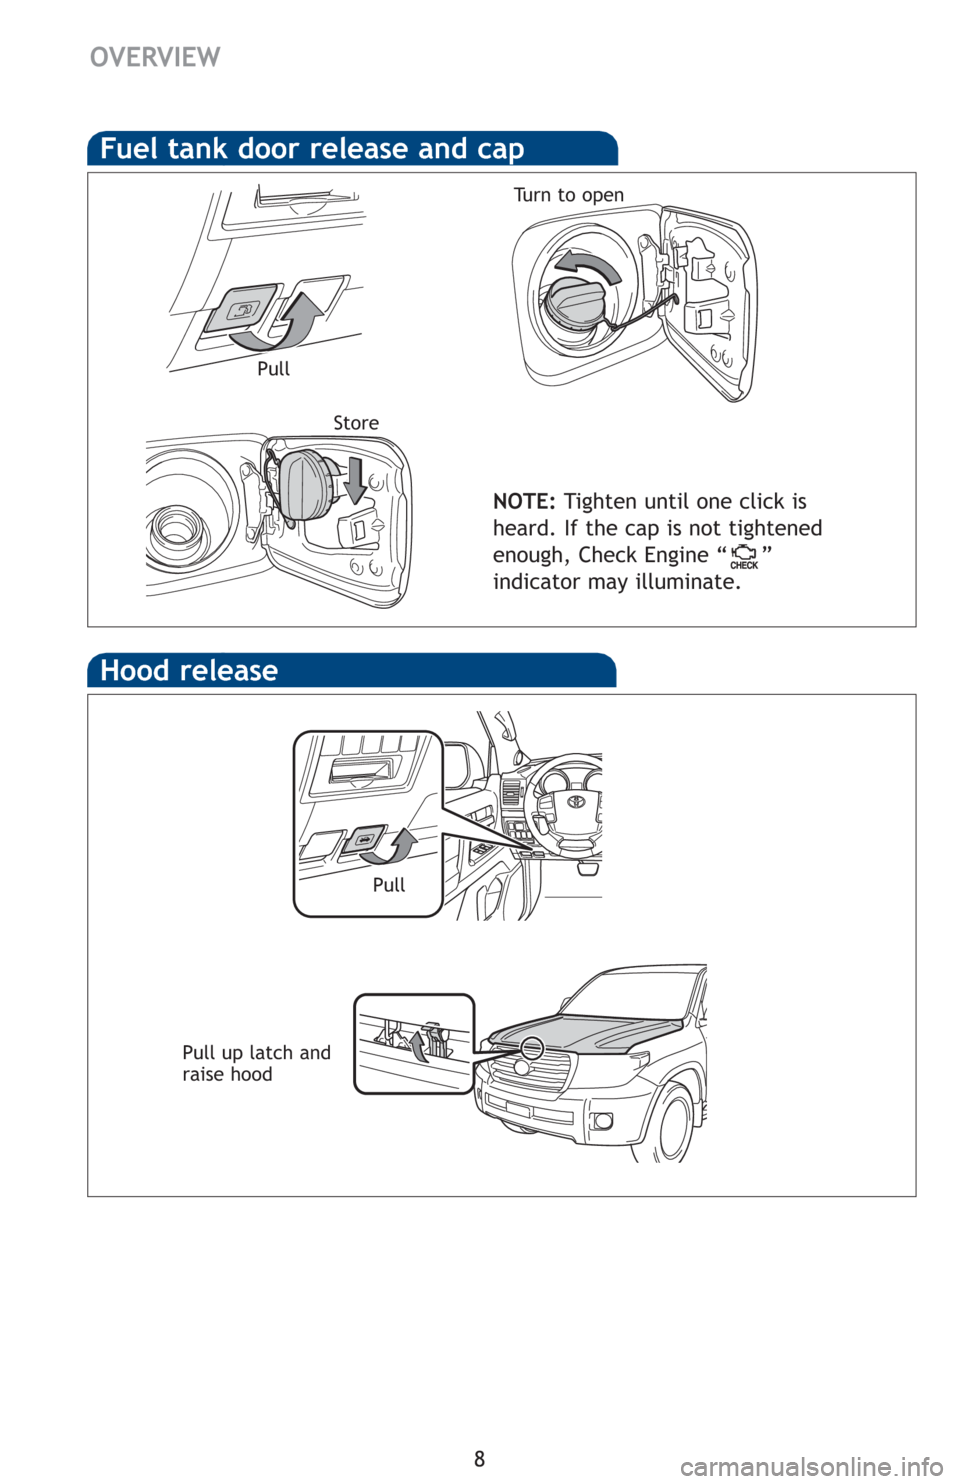 TOYOTA LAND CRUISER 2013 J200 Quick Reference Guide 8
Hood release
Pull up latch and
raise hood
Fuel tank door release and cap
NOTE:Tighten until one click is
heard. If the cap is not tightened
enough, Check Engine “ ”
indicator may illuminate.
Pul